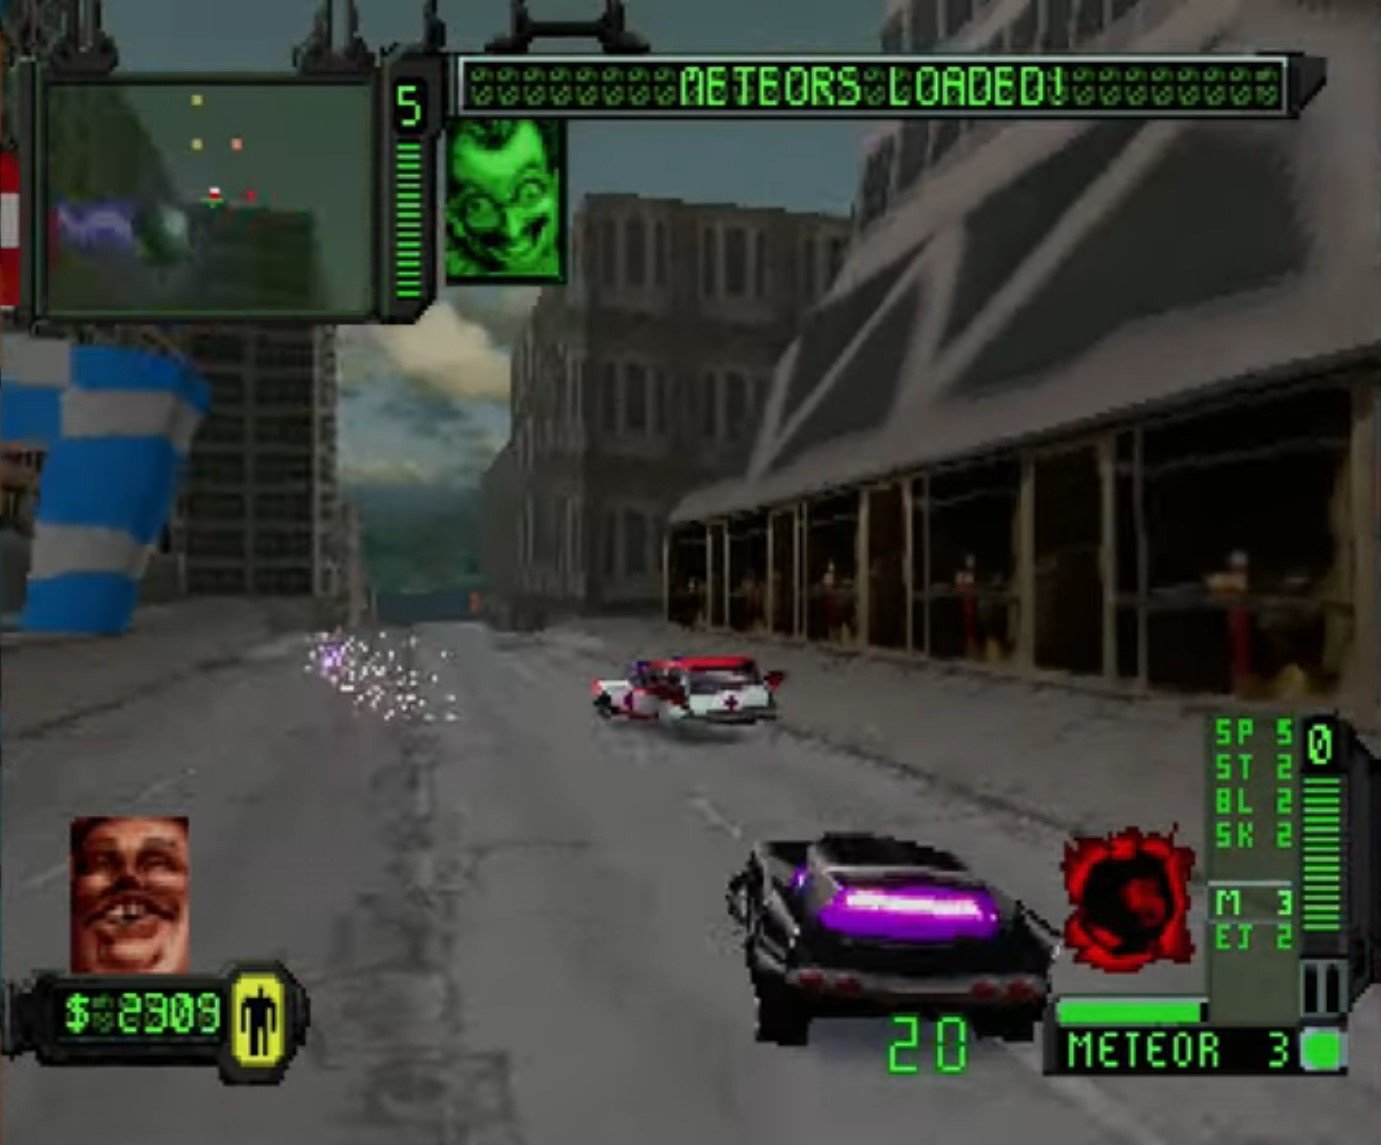 The 10 best PlayStation 1 games of all time 